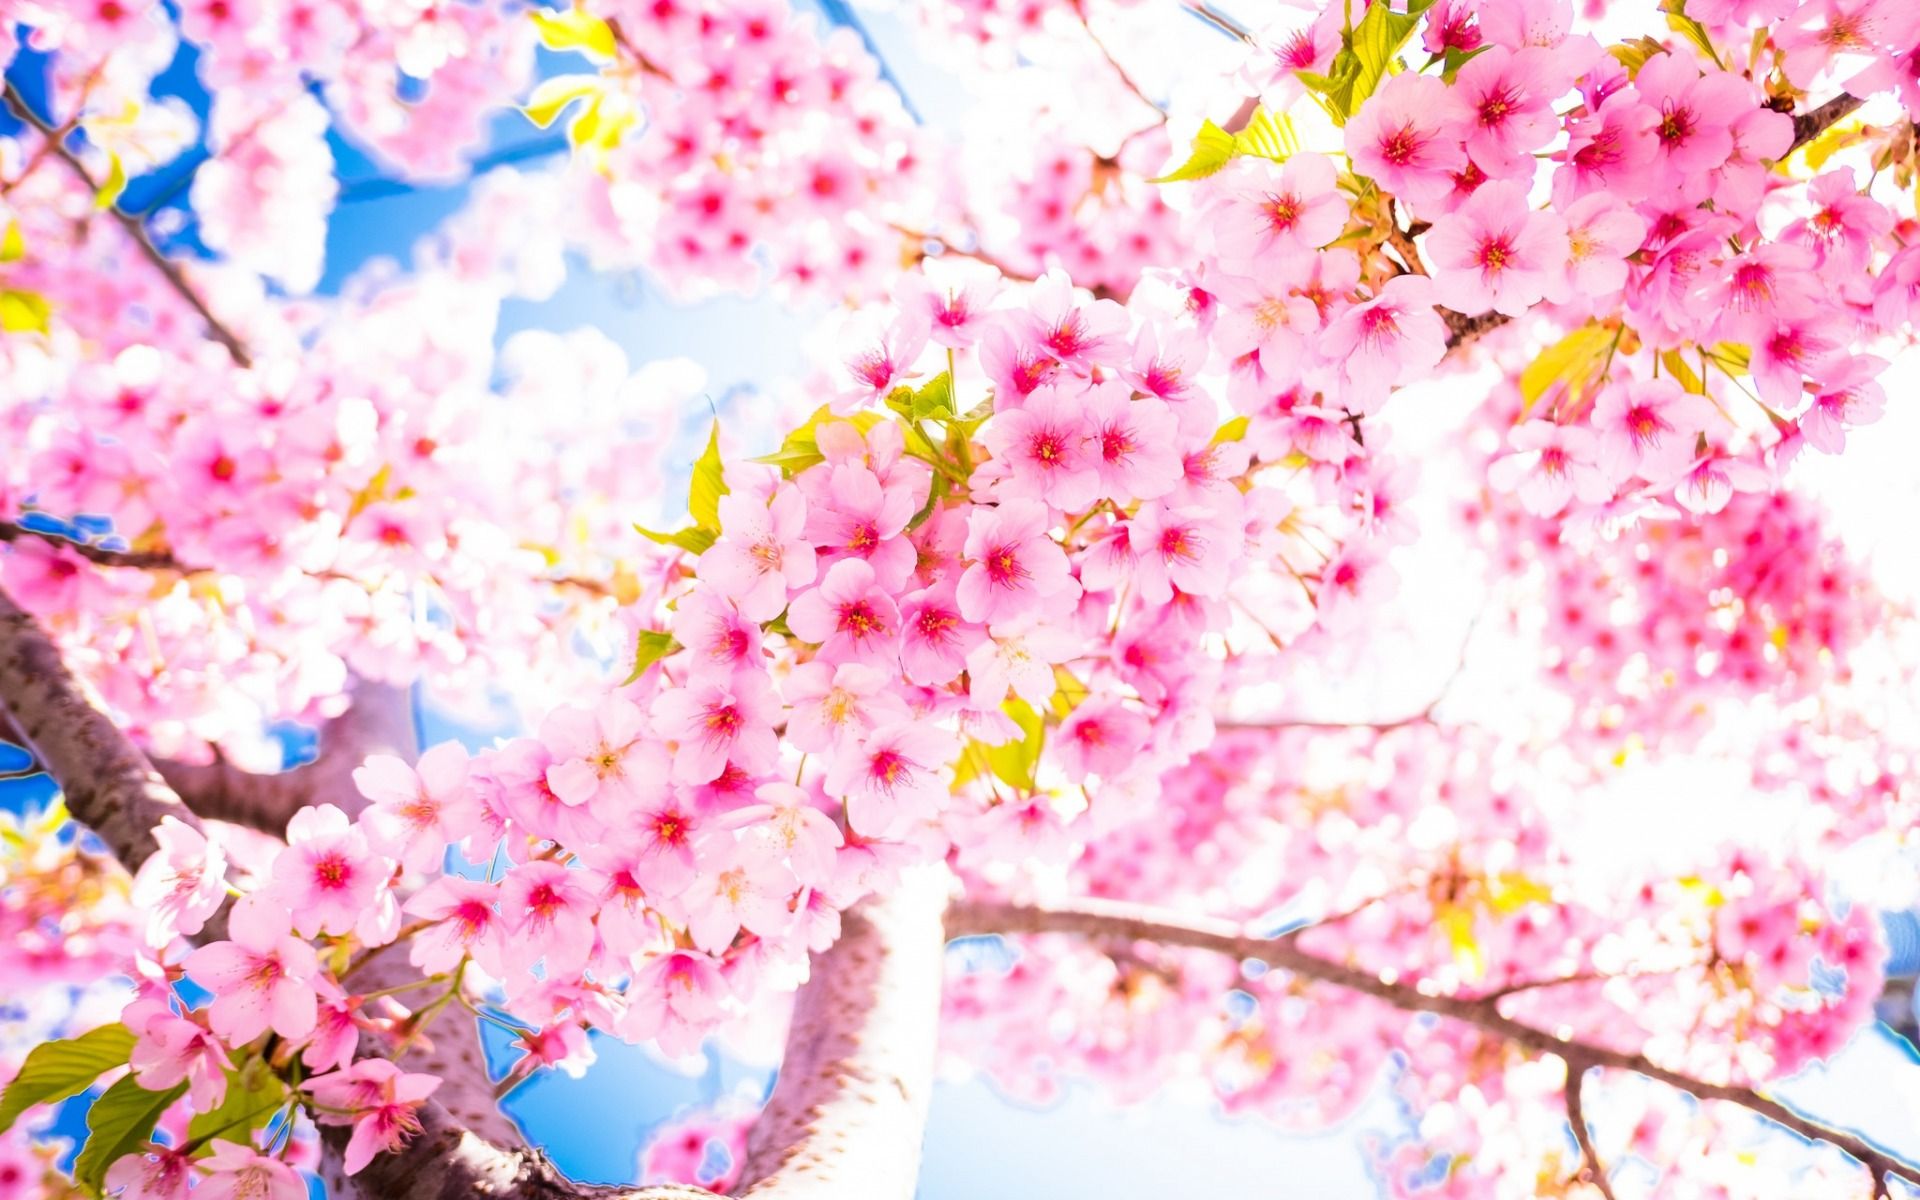 Download wallpaper sakura, cherry blossoms, blue sky, warm, spring, branches of cherry, pink flowers for desktop with resolution 1920x1200. High Quality HD picture wallpaper